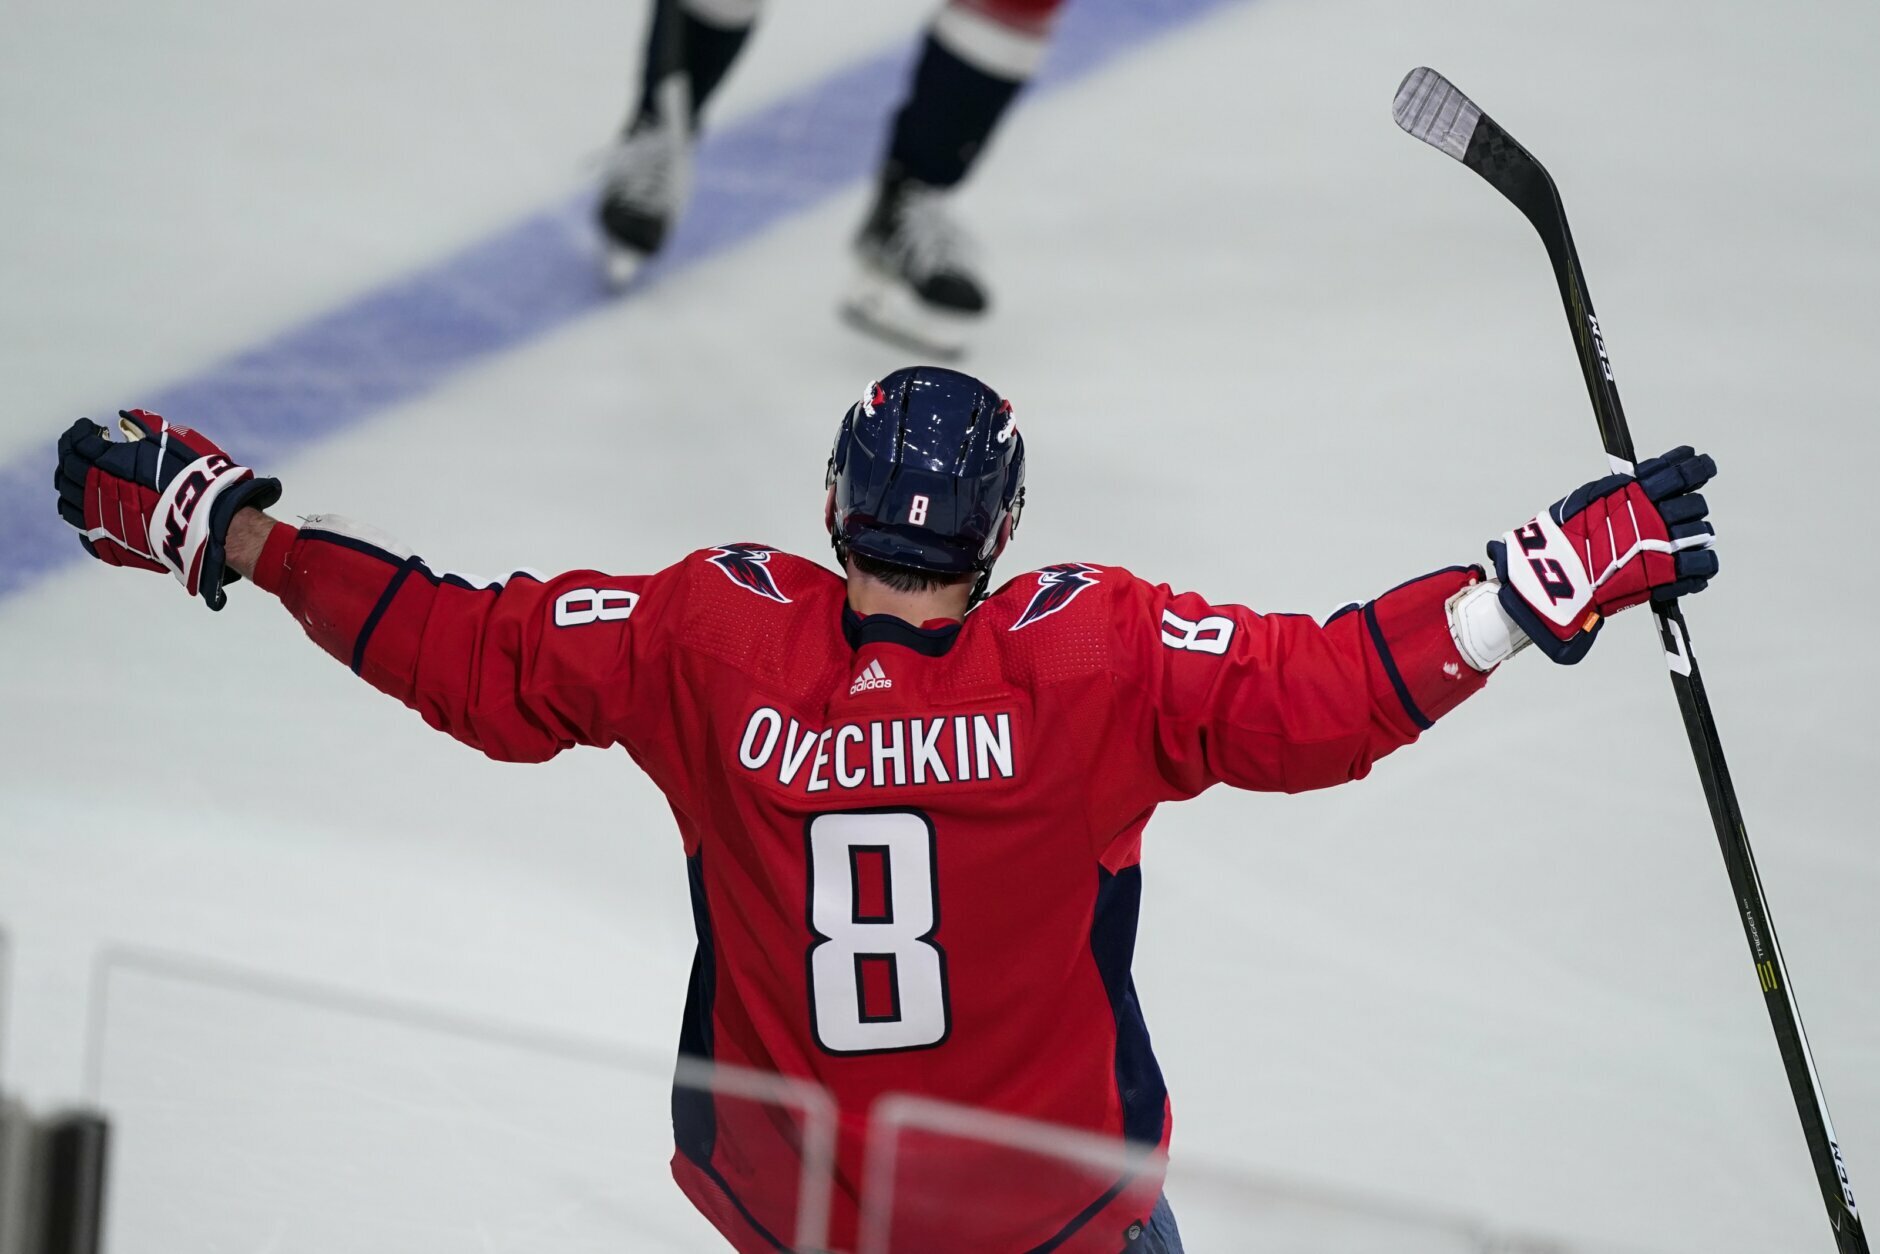 The jersey that Alex Ovechkin scored 'The Goal' in is up for auction